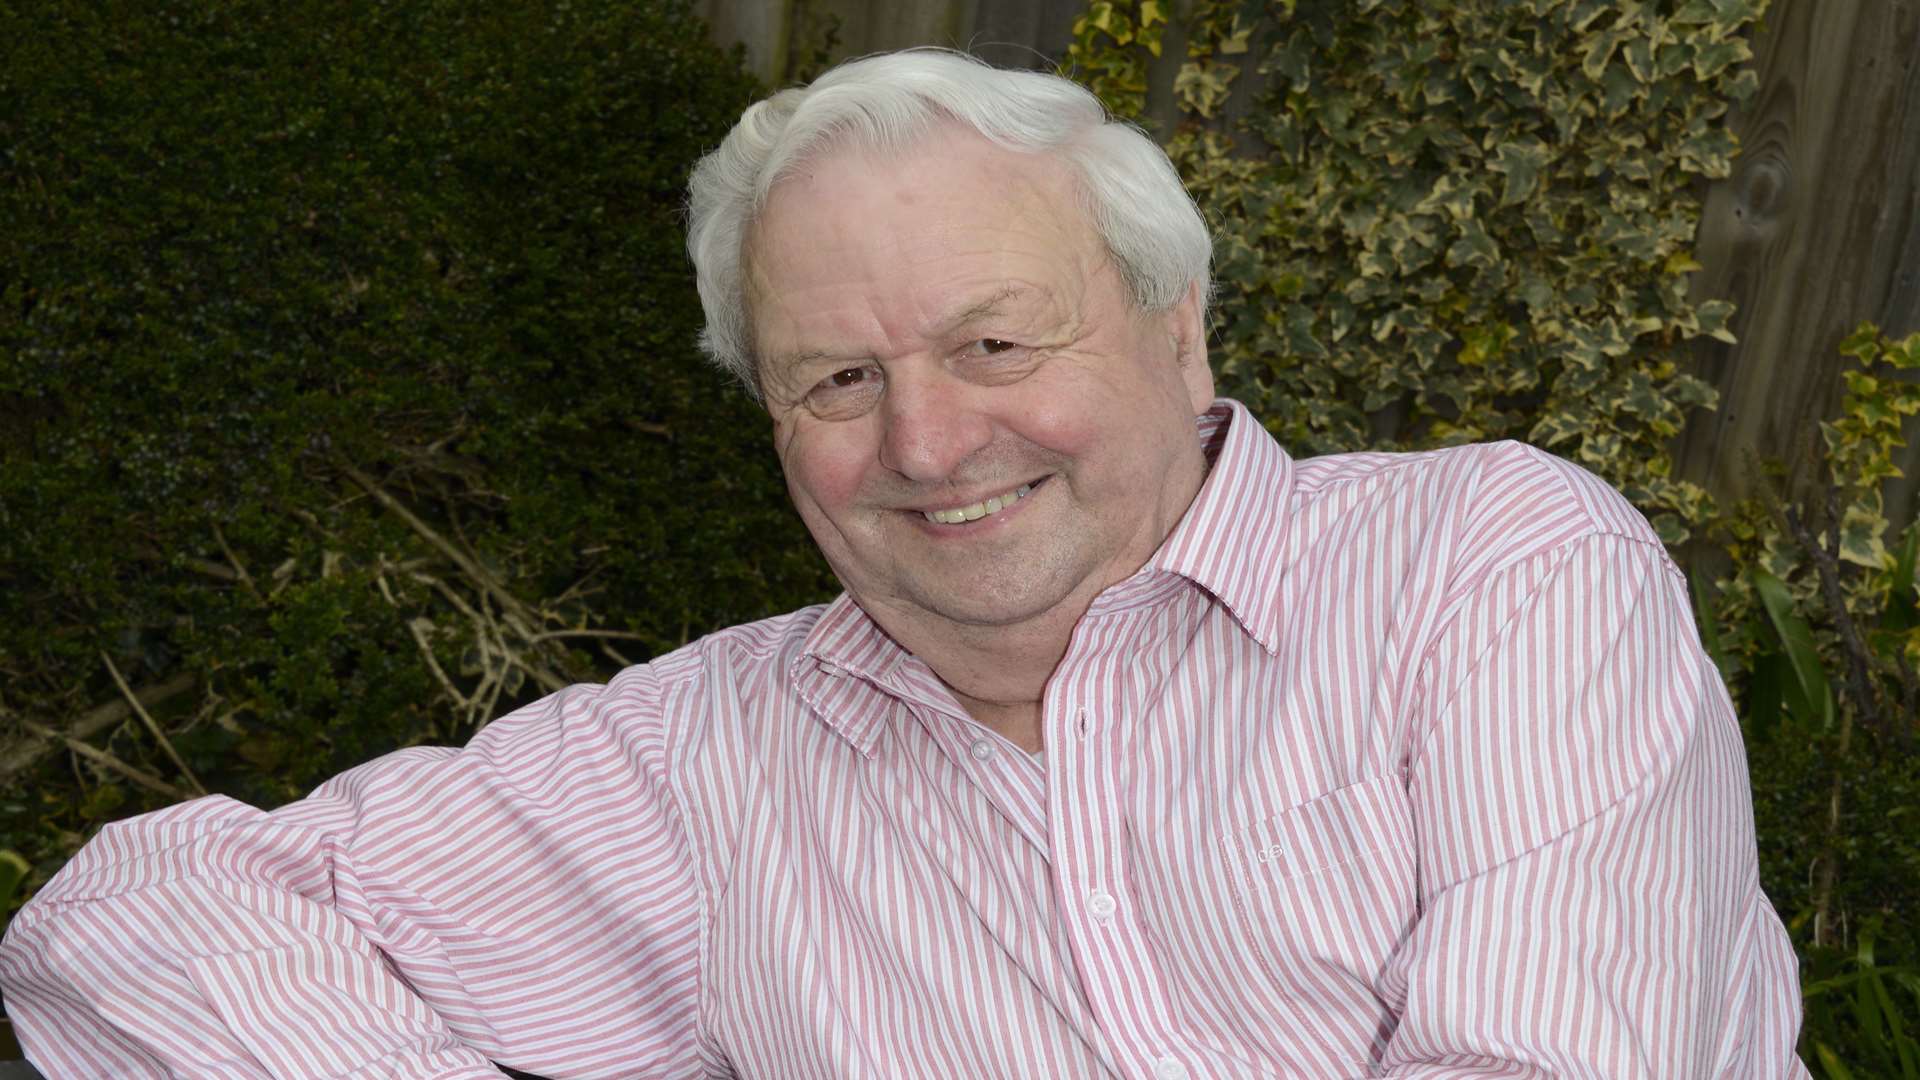 Chris Capon, who served as a Hythe councillor for 46 years, has died